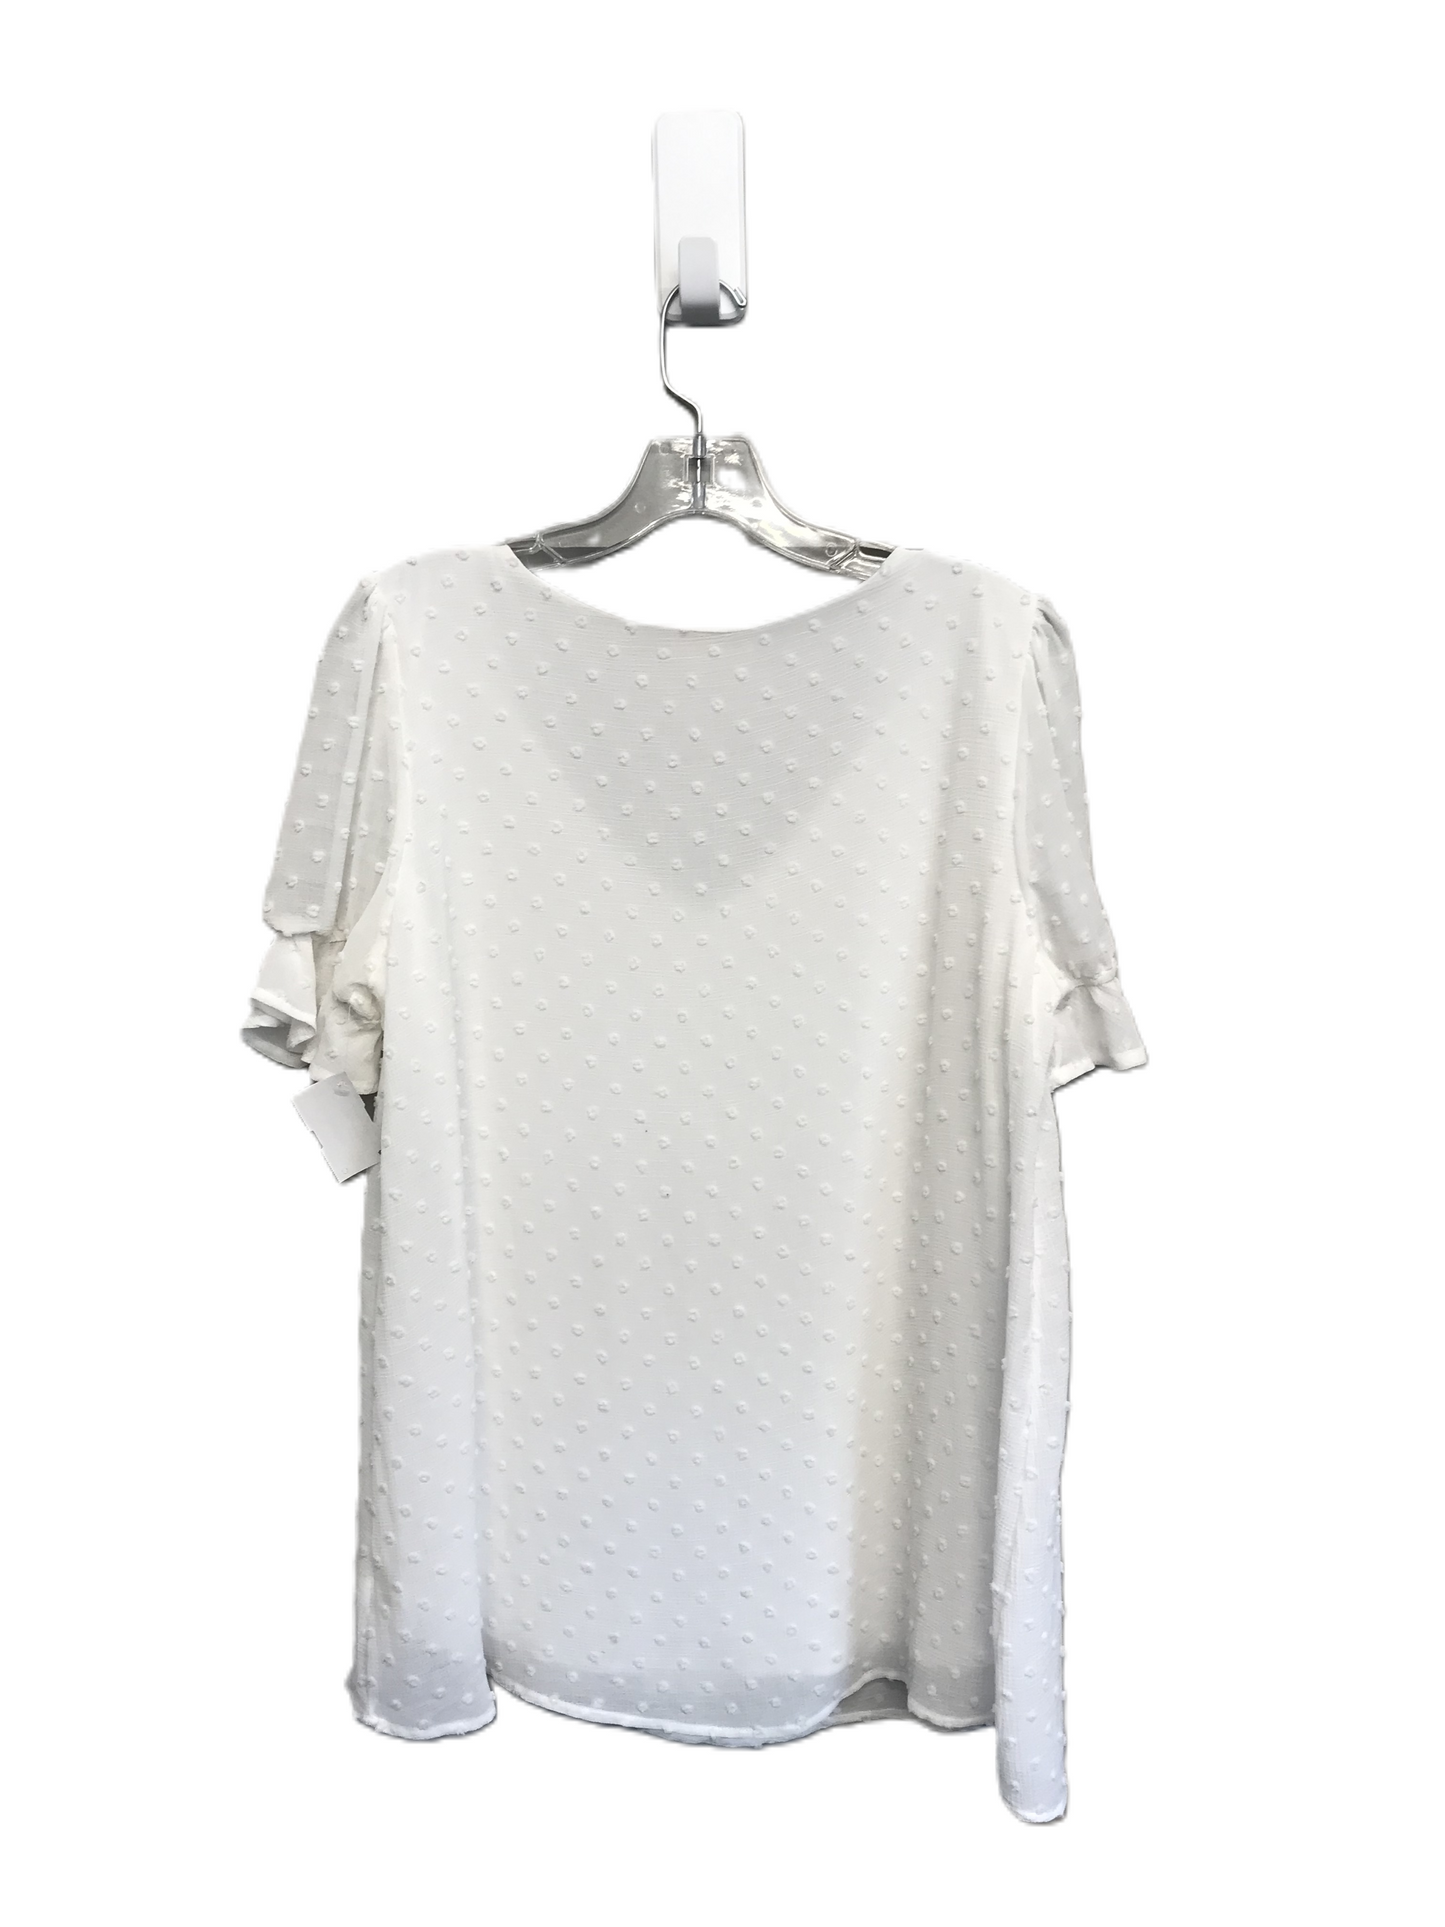 White Top Short Sleeve By Reb In J Size: L